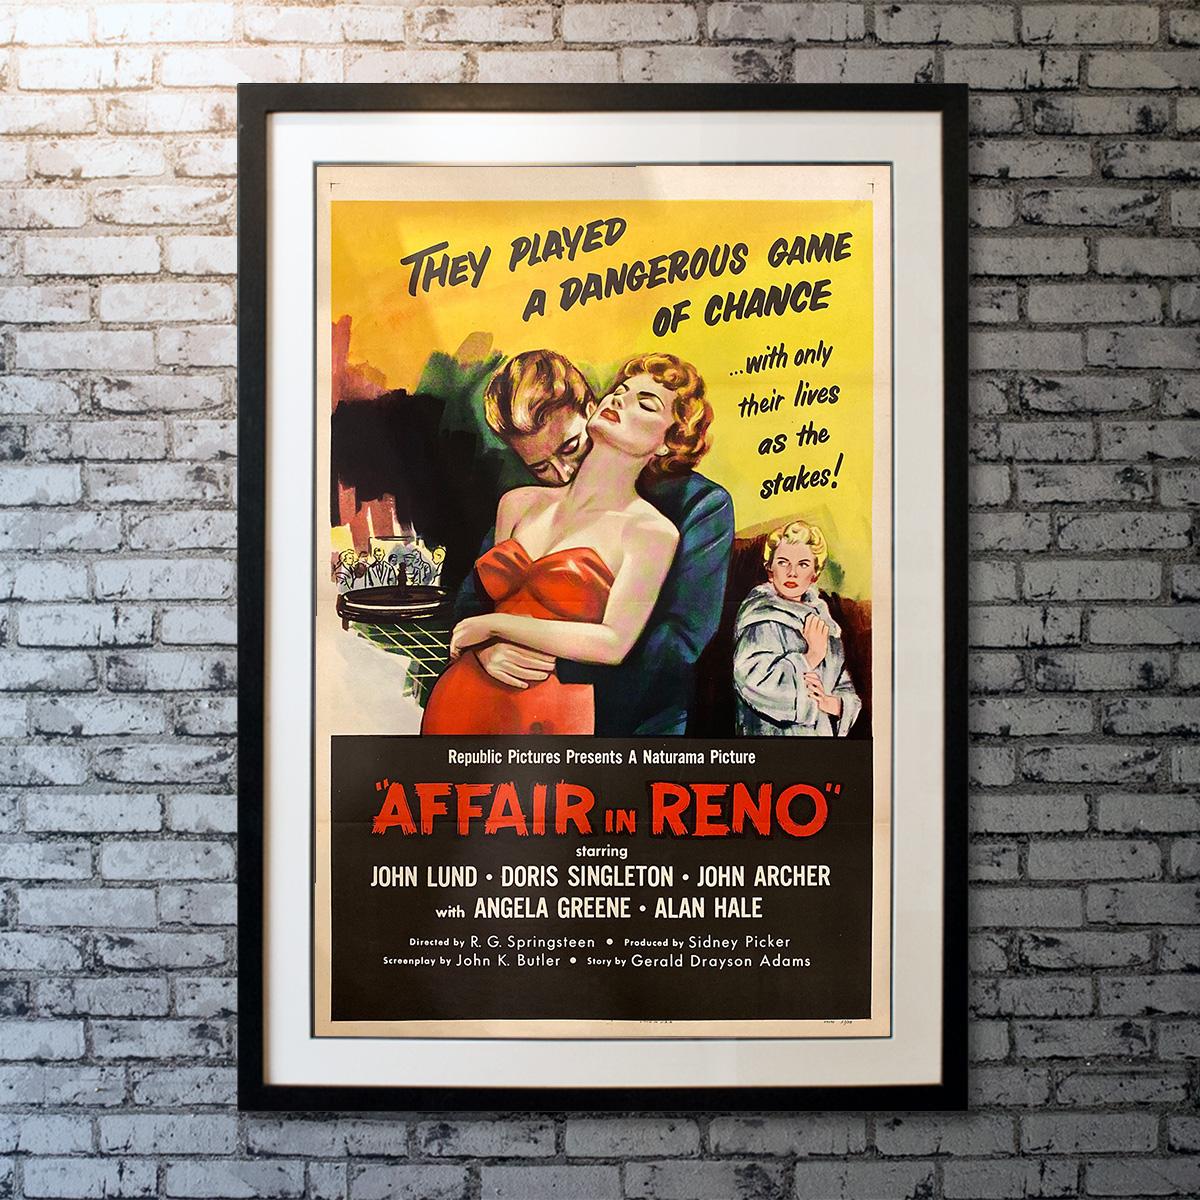 A tycoon sends a PR man (John Lund) and a woman detective (Doris Singleton) to Reno to buy off a gambler (John Archer) courting his daughter.

Linen-backing: £175

Framing options:
Glass and single mount £250
Glass and double mount £275
Anti